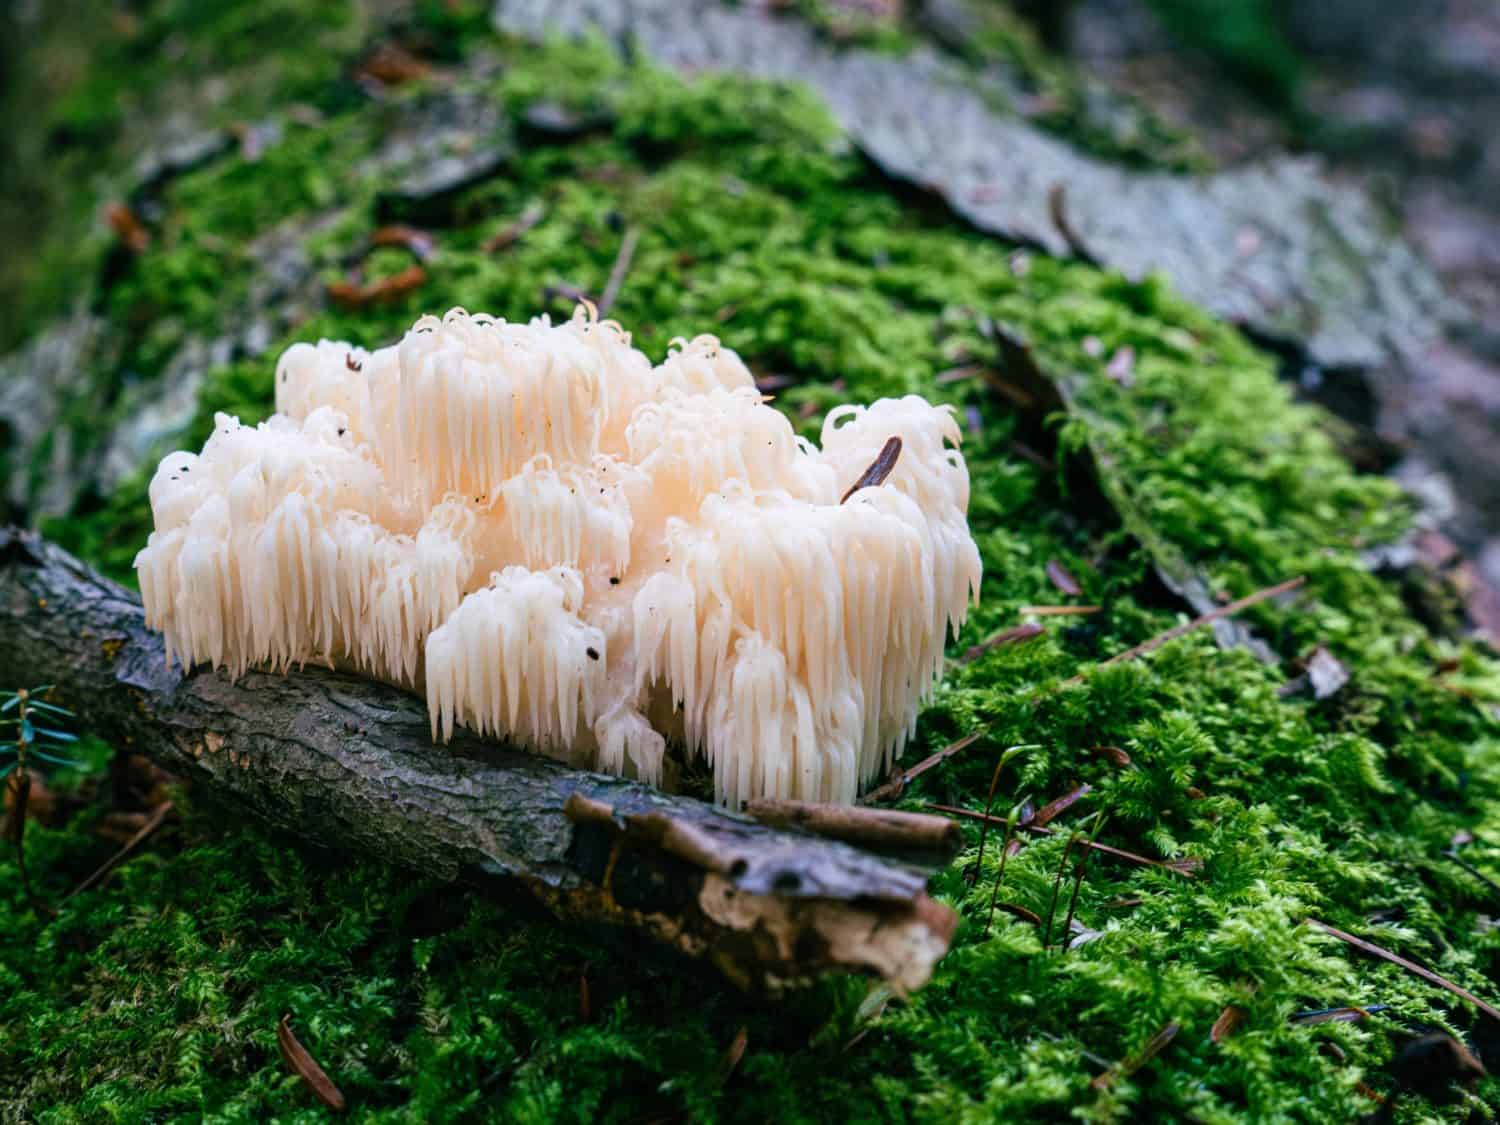 Bear’s Head Tooth mushroom growing on a moss-covered decomposing tree in an old-growth forest